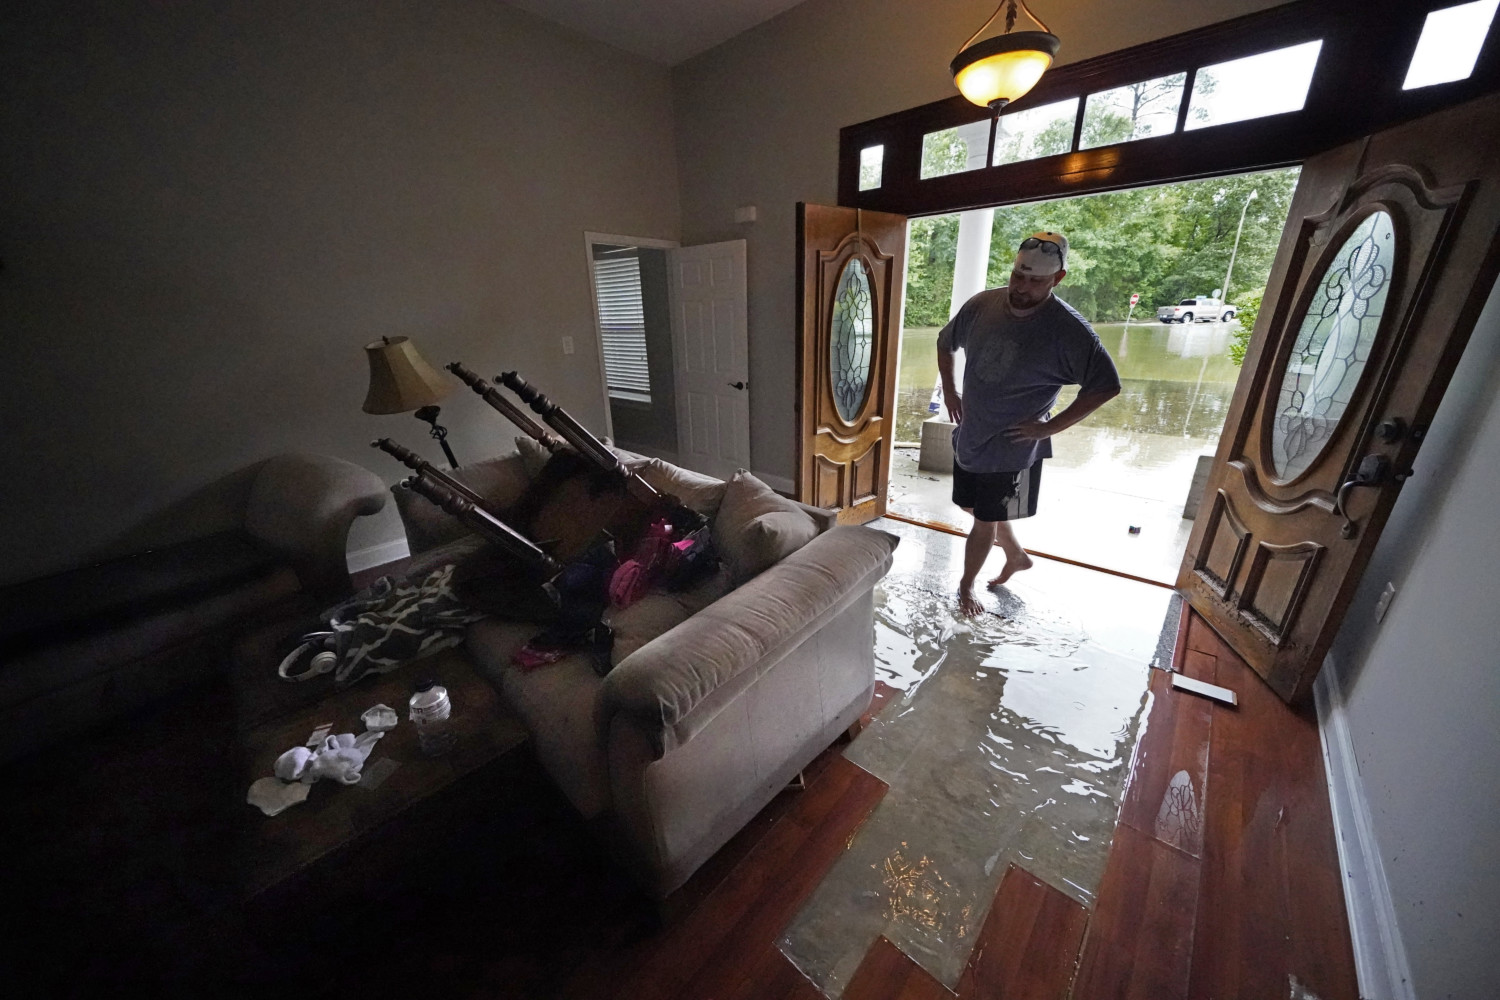 Tropical storm floods a home in Slidell, Louisiana